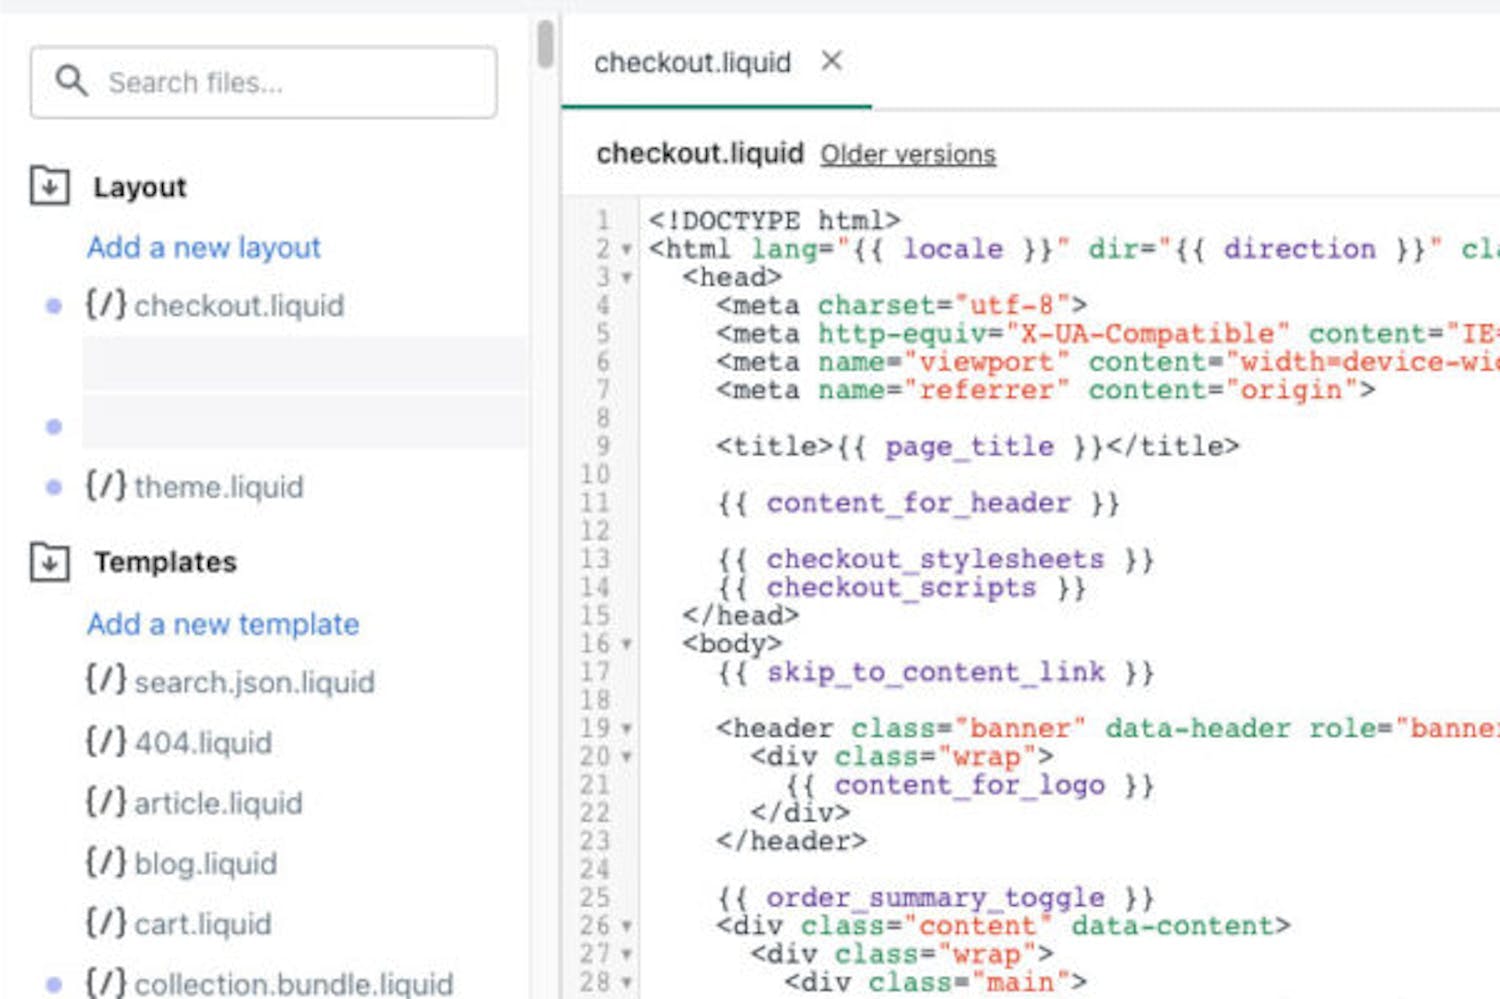 A screenshot of a checkout.liquid file opened in a code editor